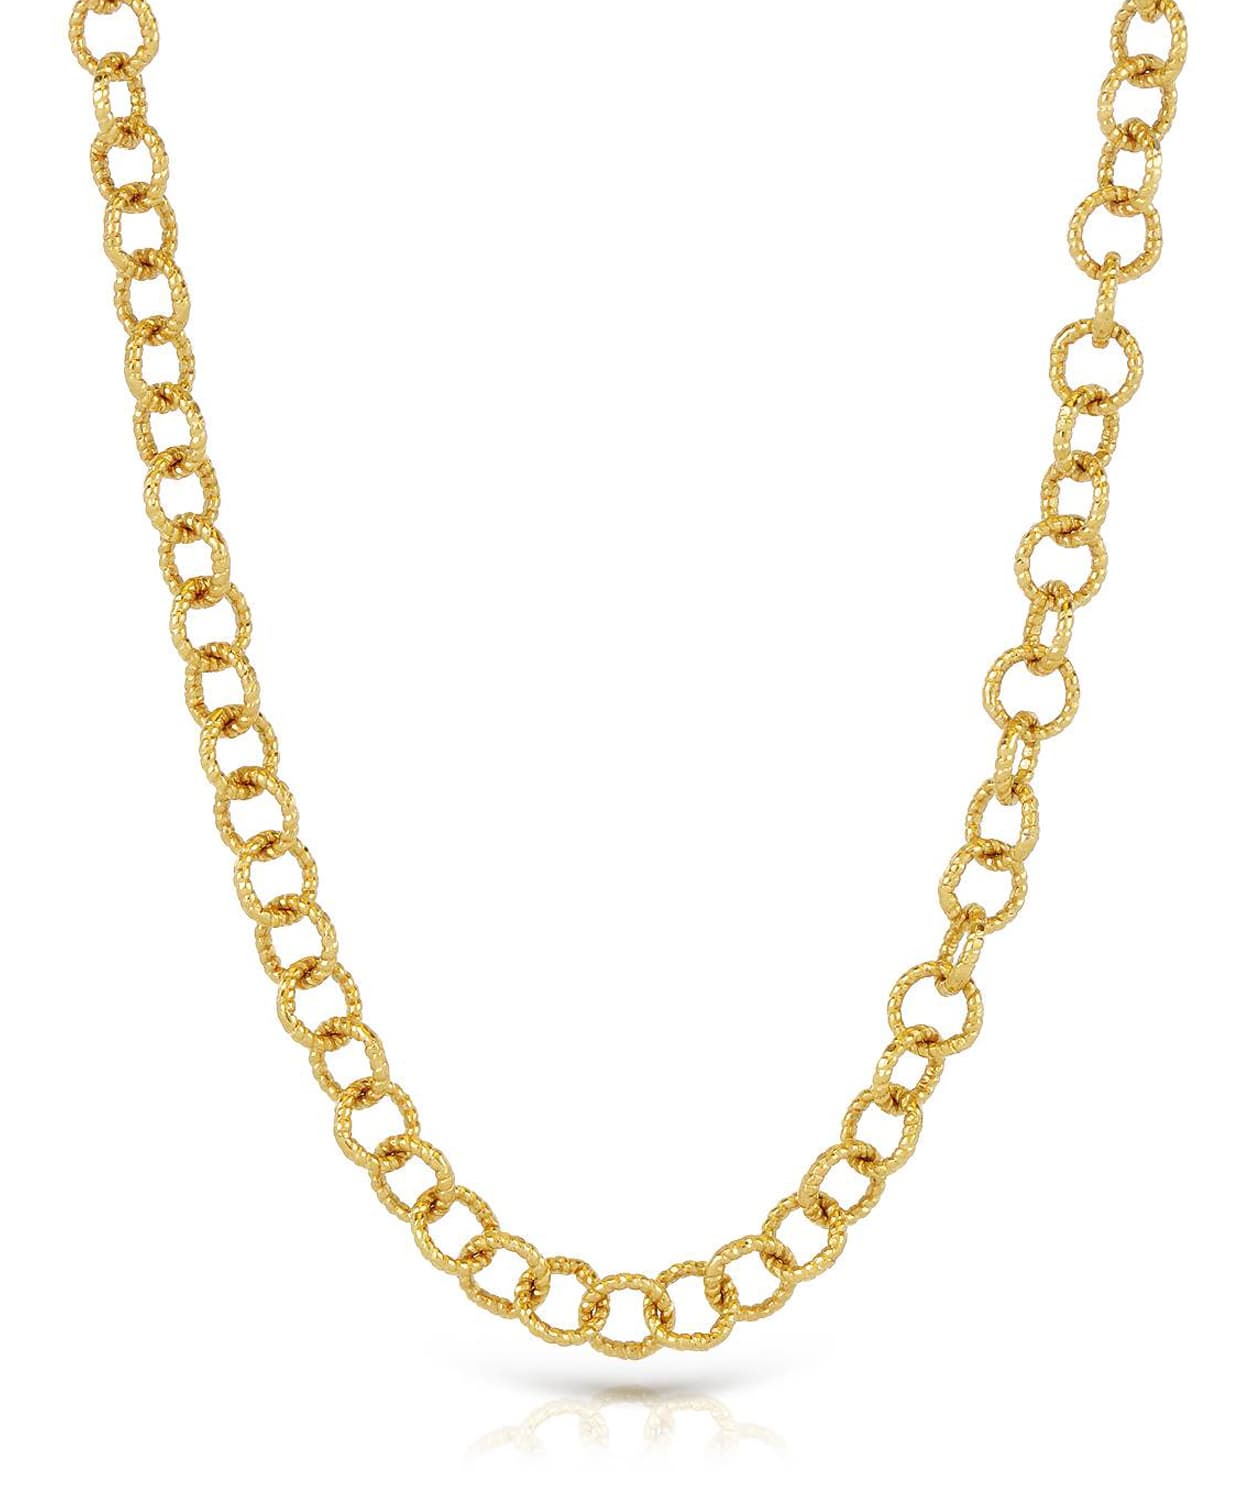 2.7mm 14k Yellow Gold Textured Link Chain View 1